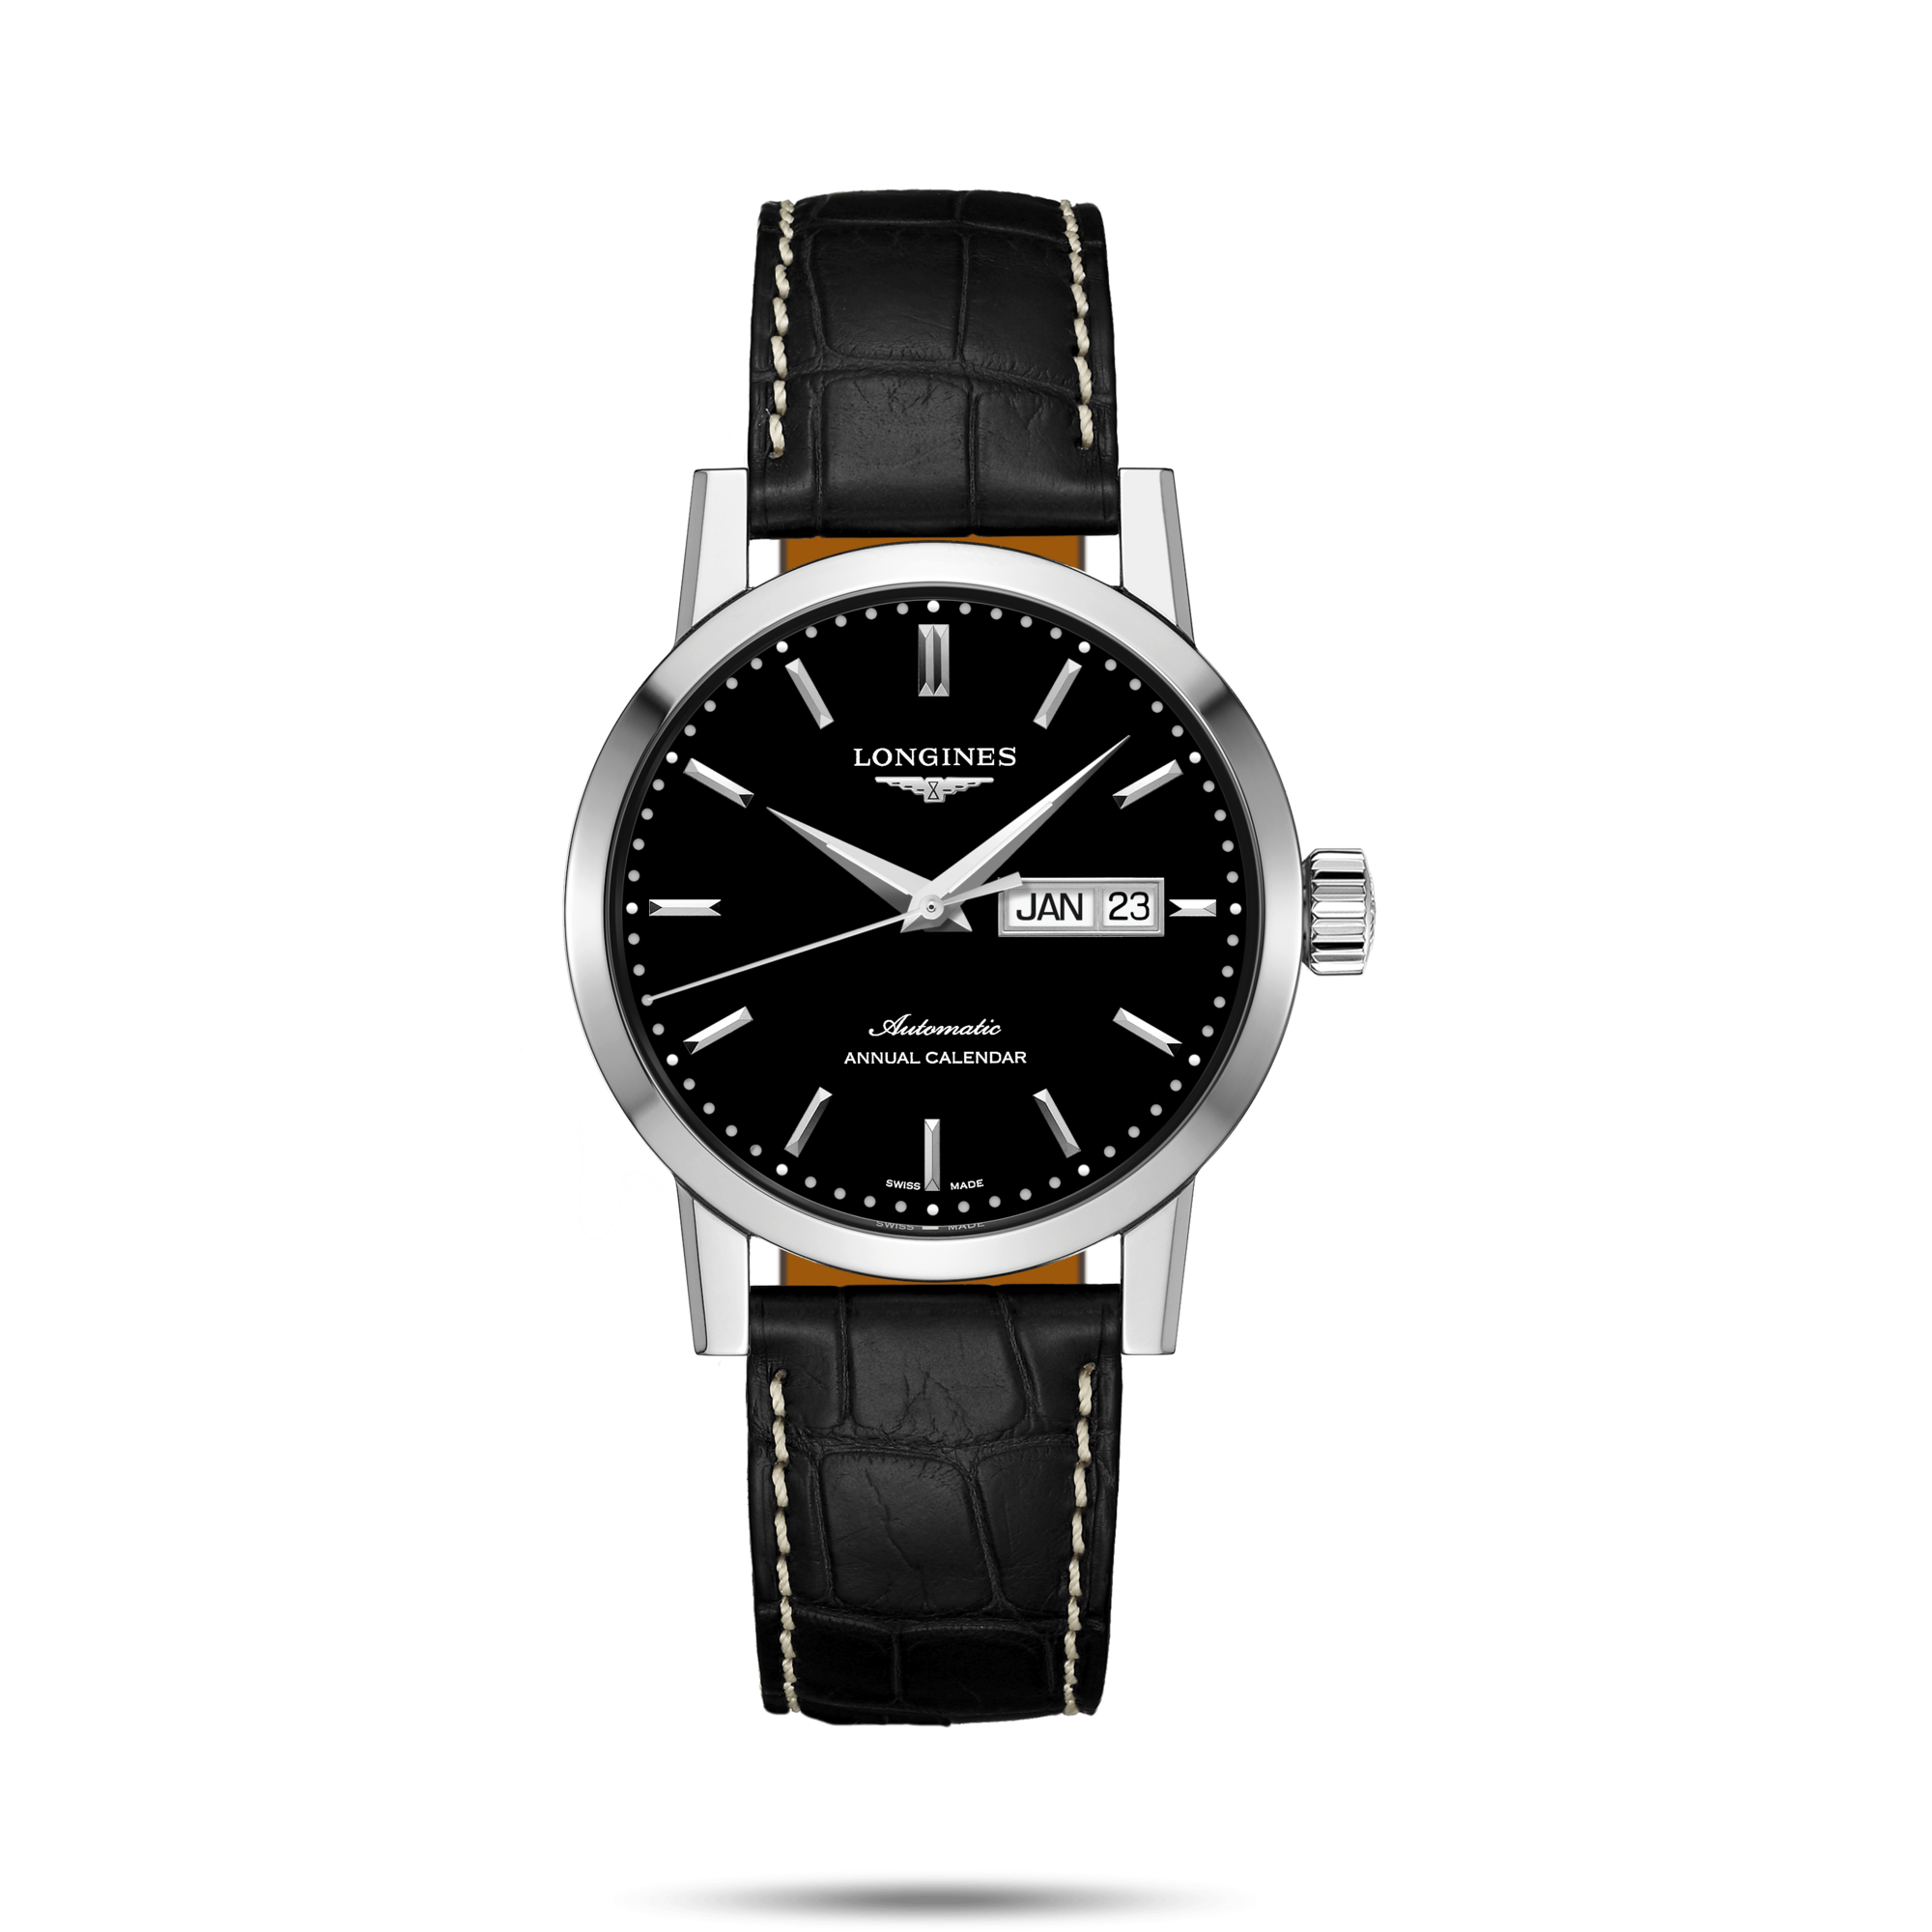 The Longines 1832 Watchmaking Tradition Référence :  L4.827.4.52.0 -1